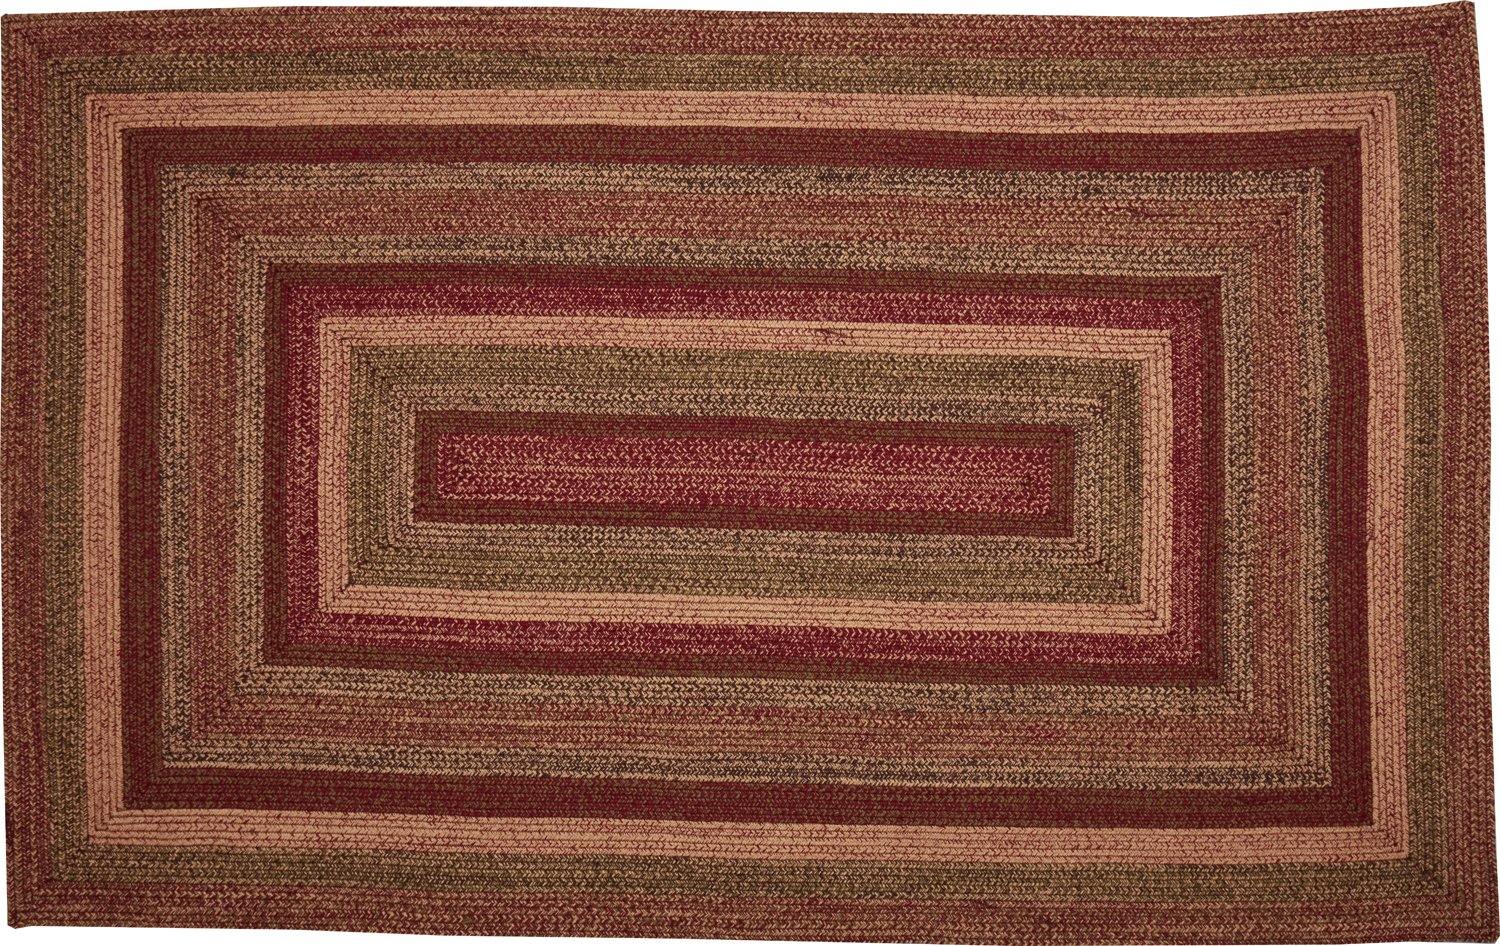 Cider Mill Jute Braided Rug Rect 5'x8' with Rug Pad VHC Brands - The Fox Decor